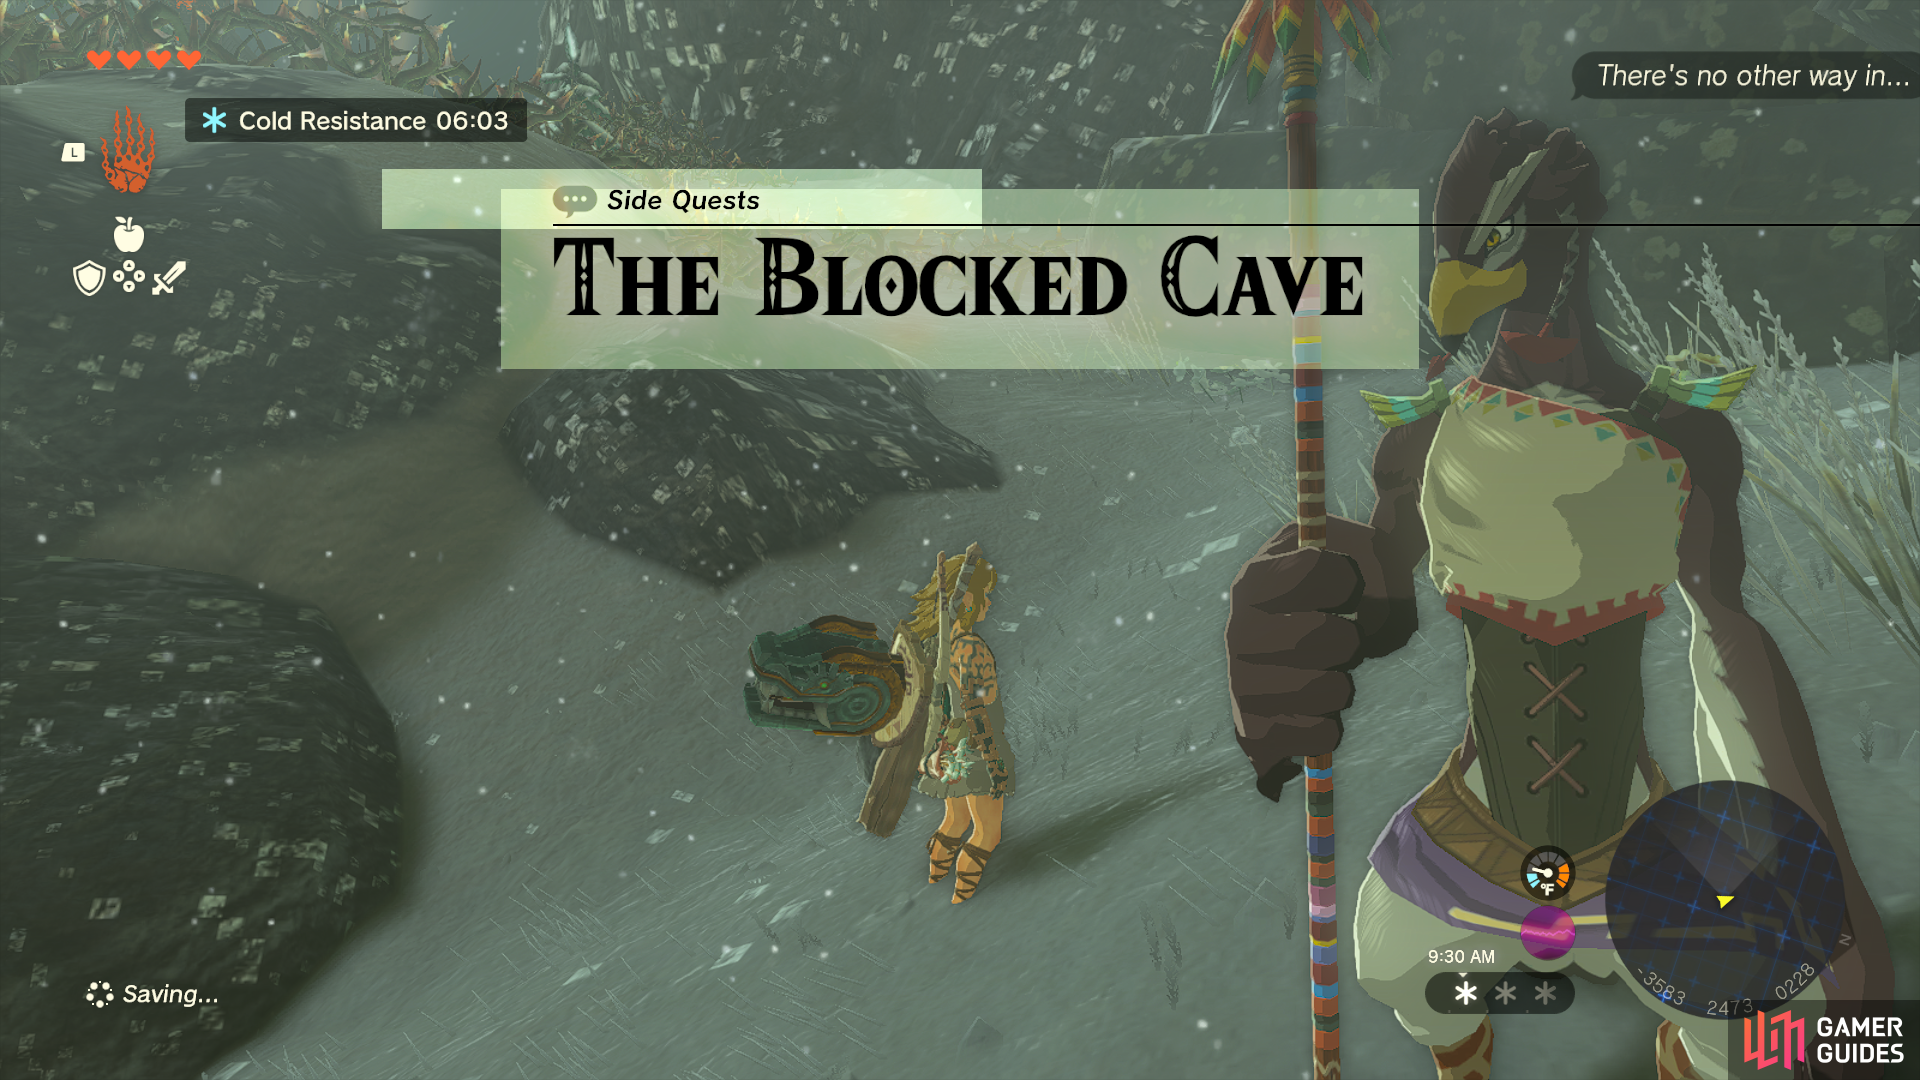 Starting The Blocked Cave side quest in Tears of The Kingdom.